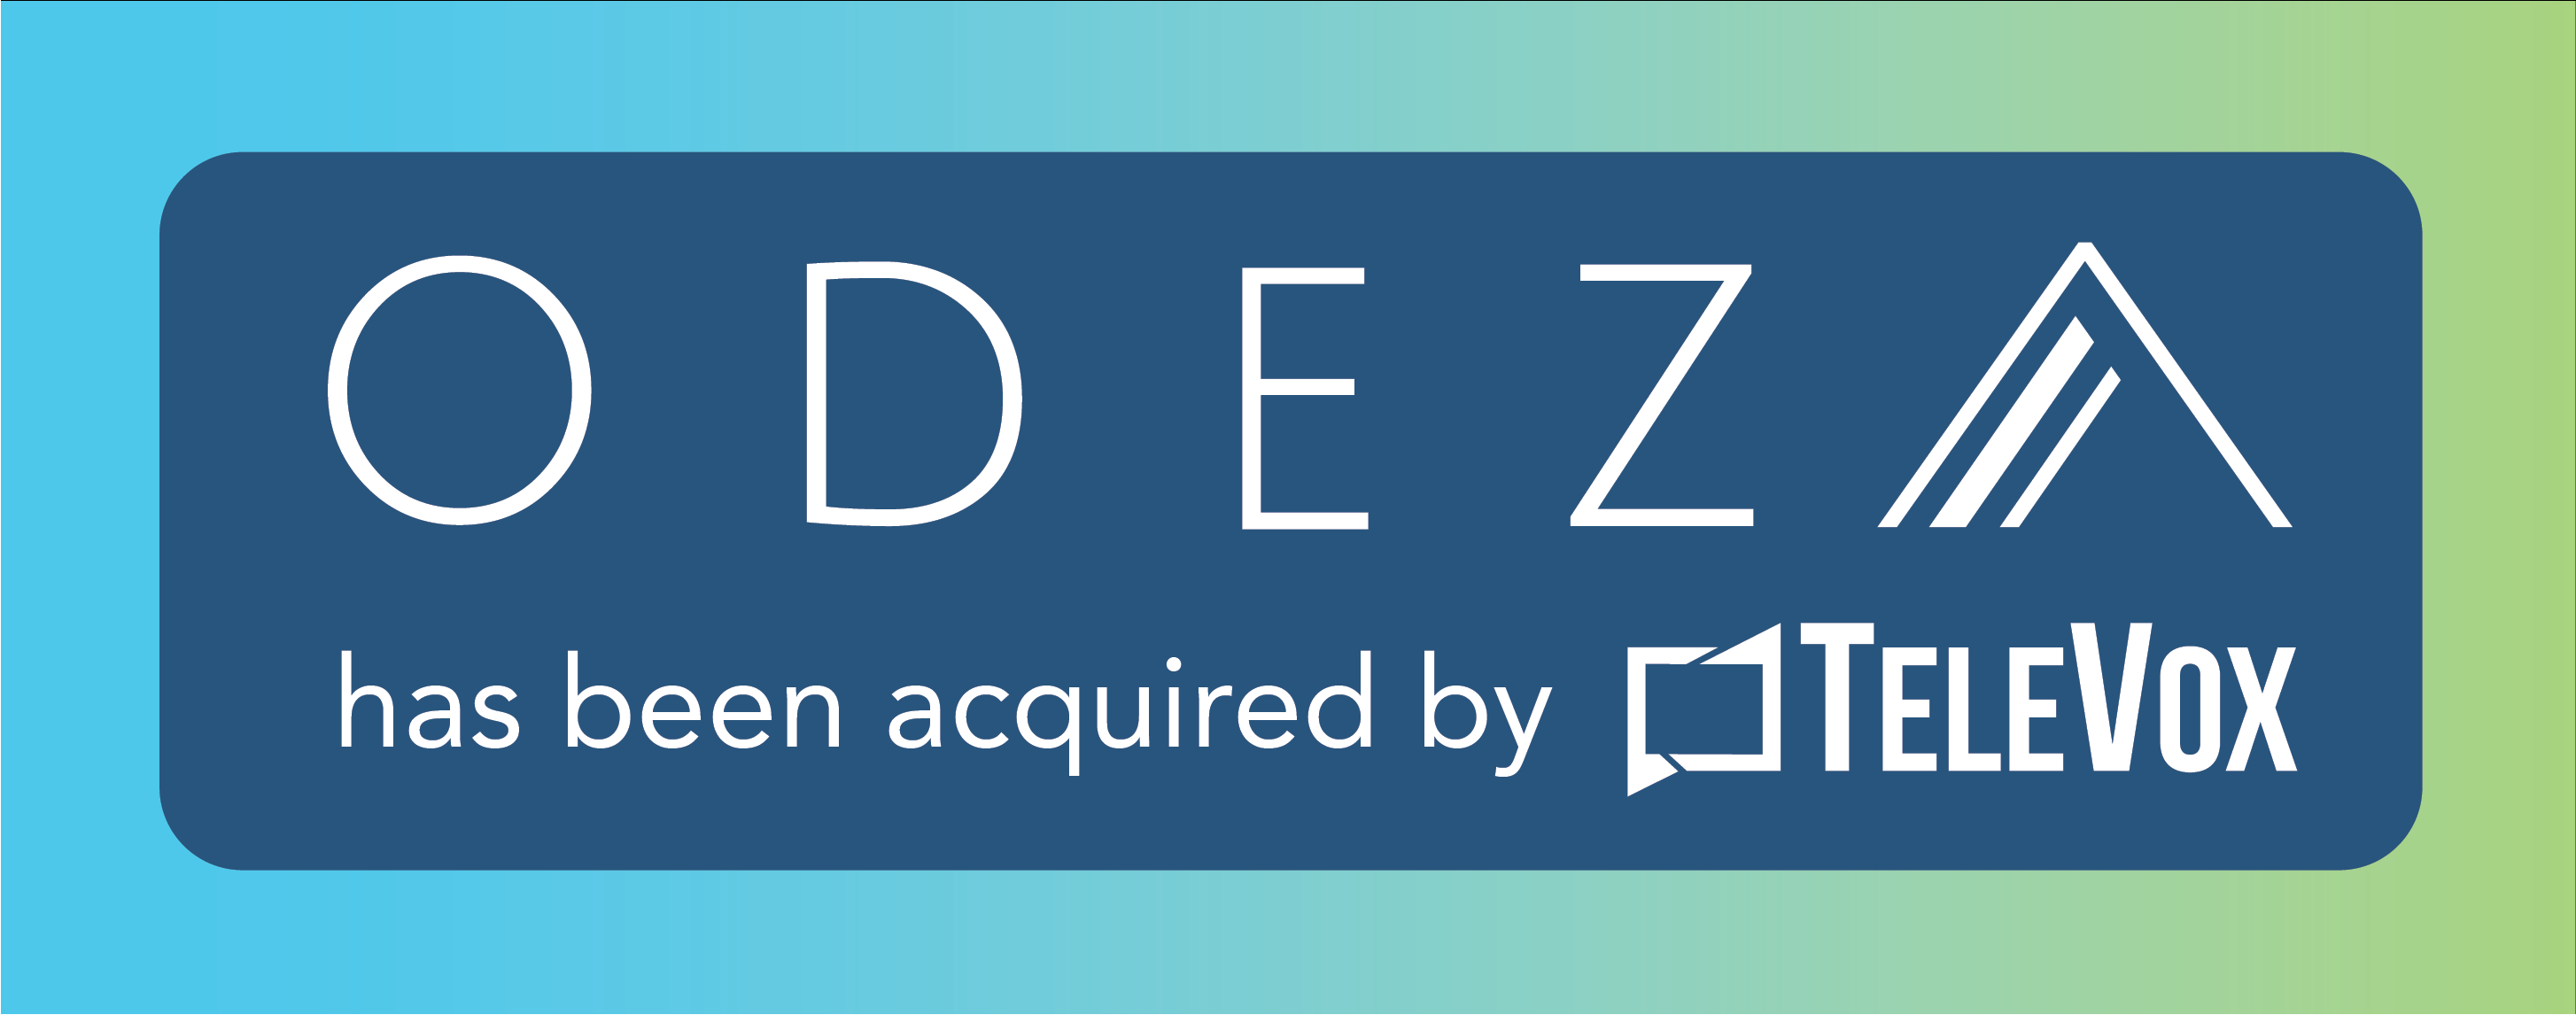 TeleVox Acquires Odeza Patient Engagement Business from Ensemble Health Partners